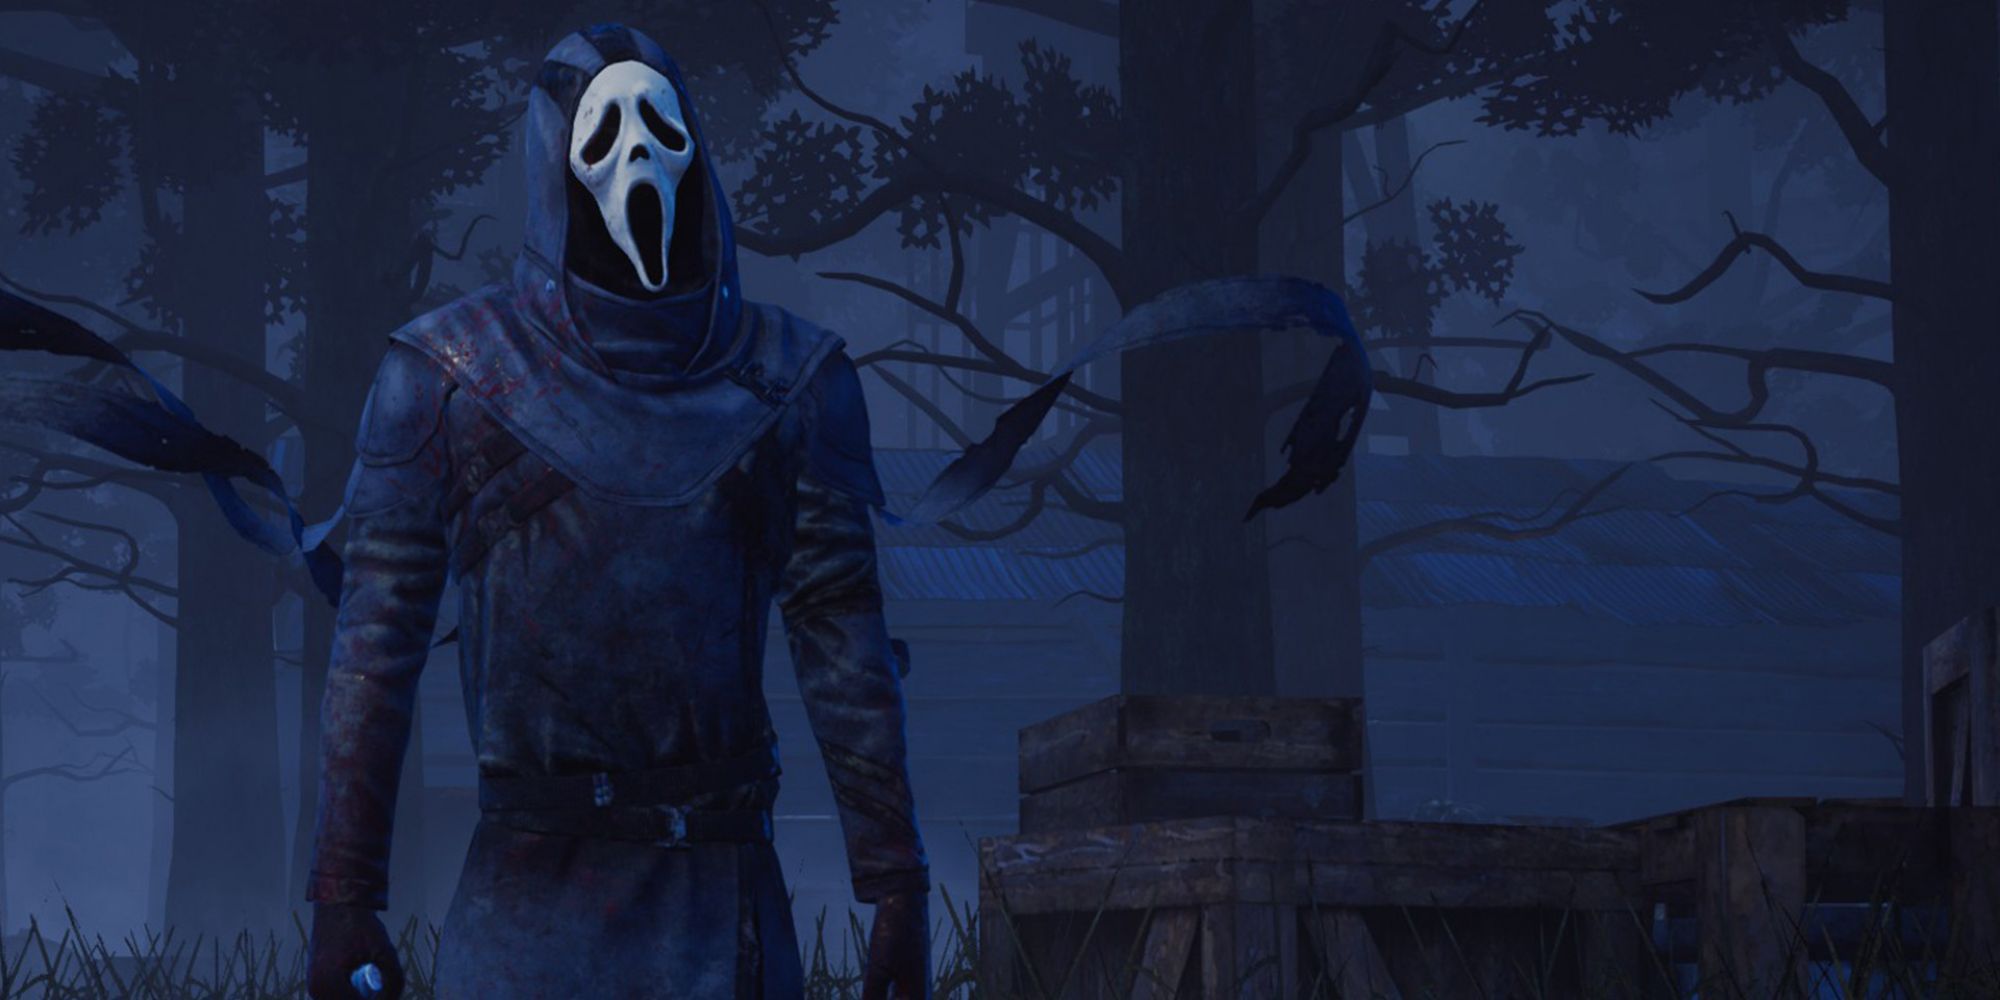 The Ghost Face posing in Dead By Daylight